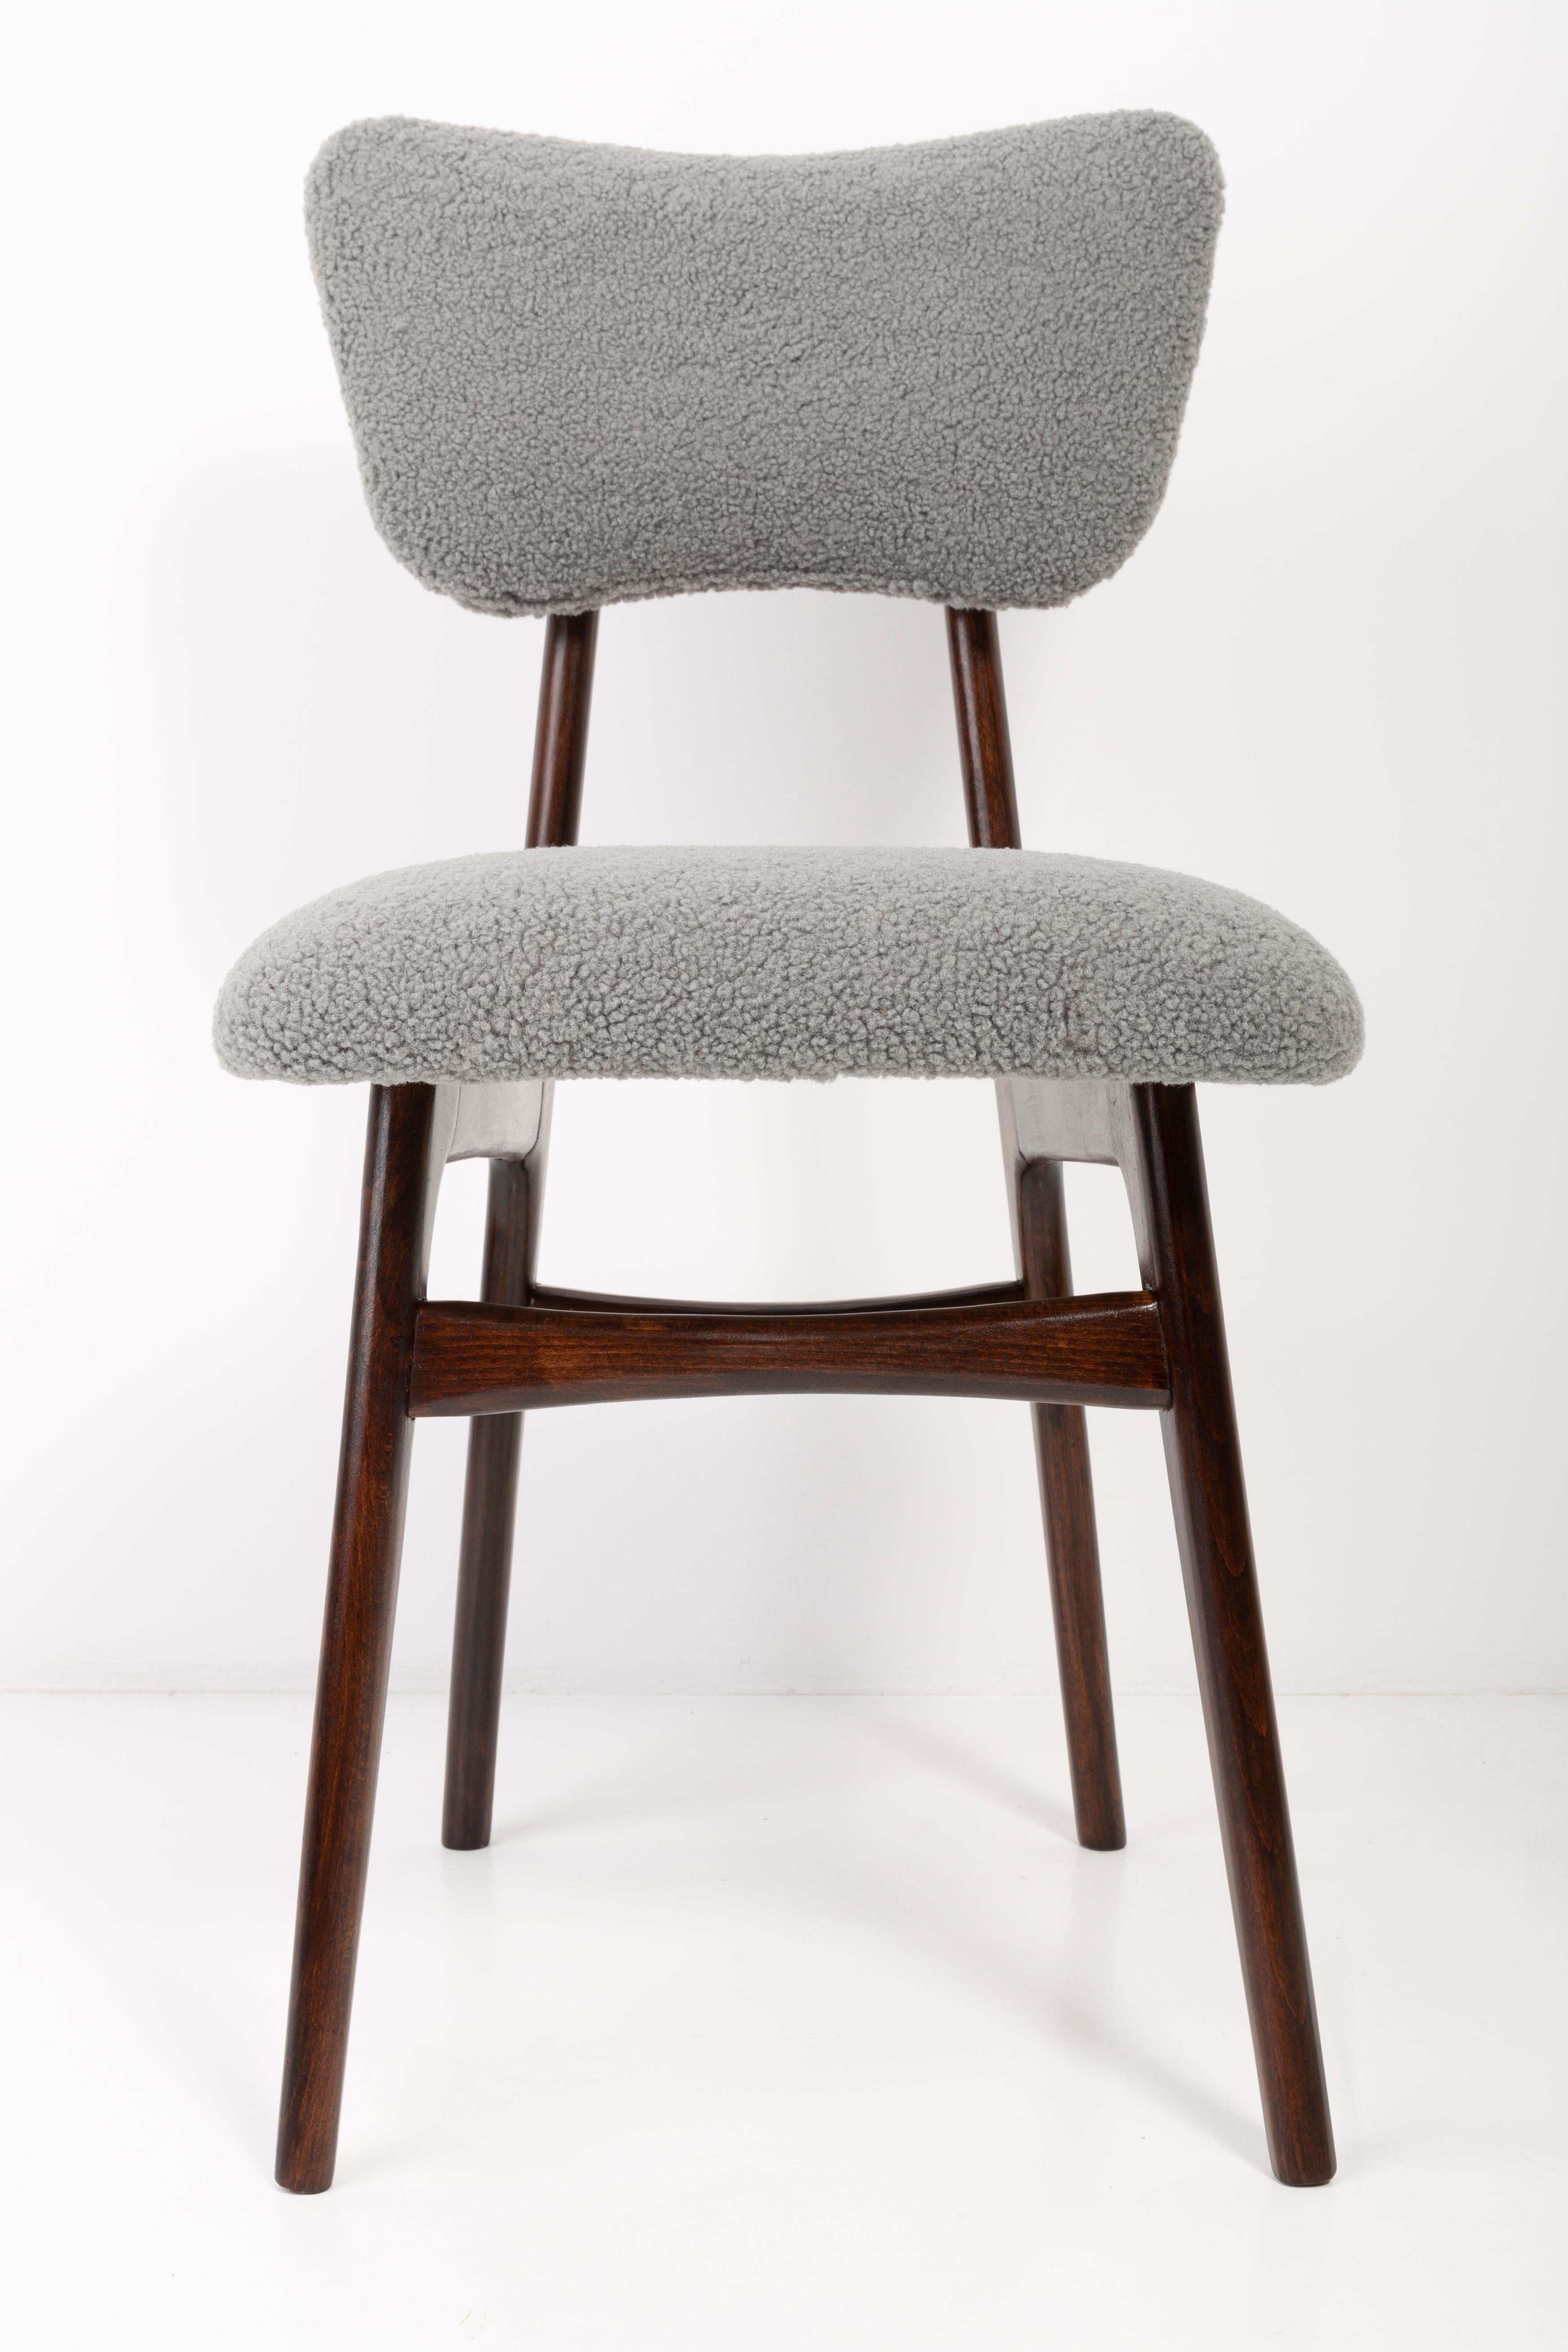 Set of Four 20th Century Gray Boucle Chairs, 1960s For Sale 6